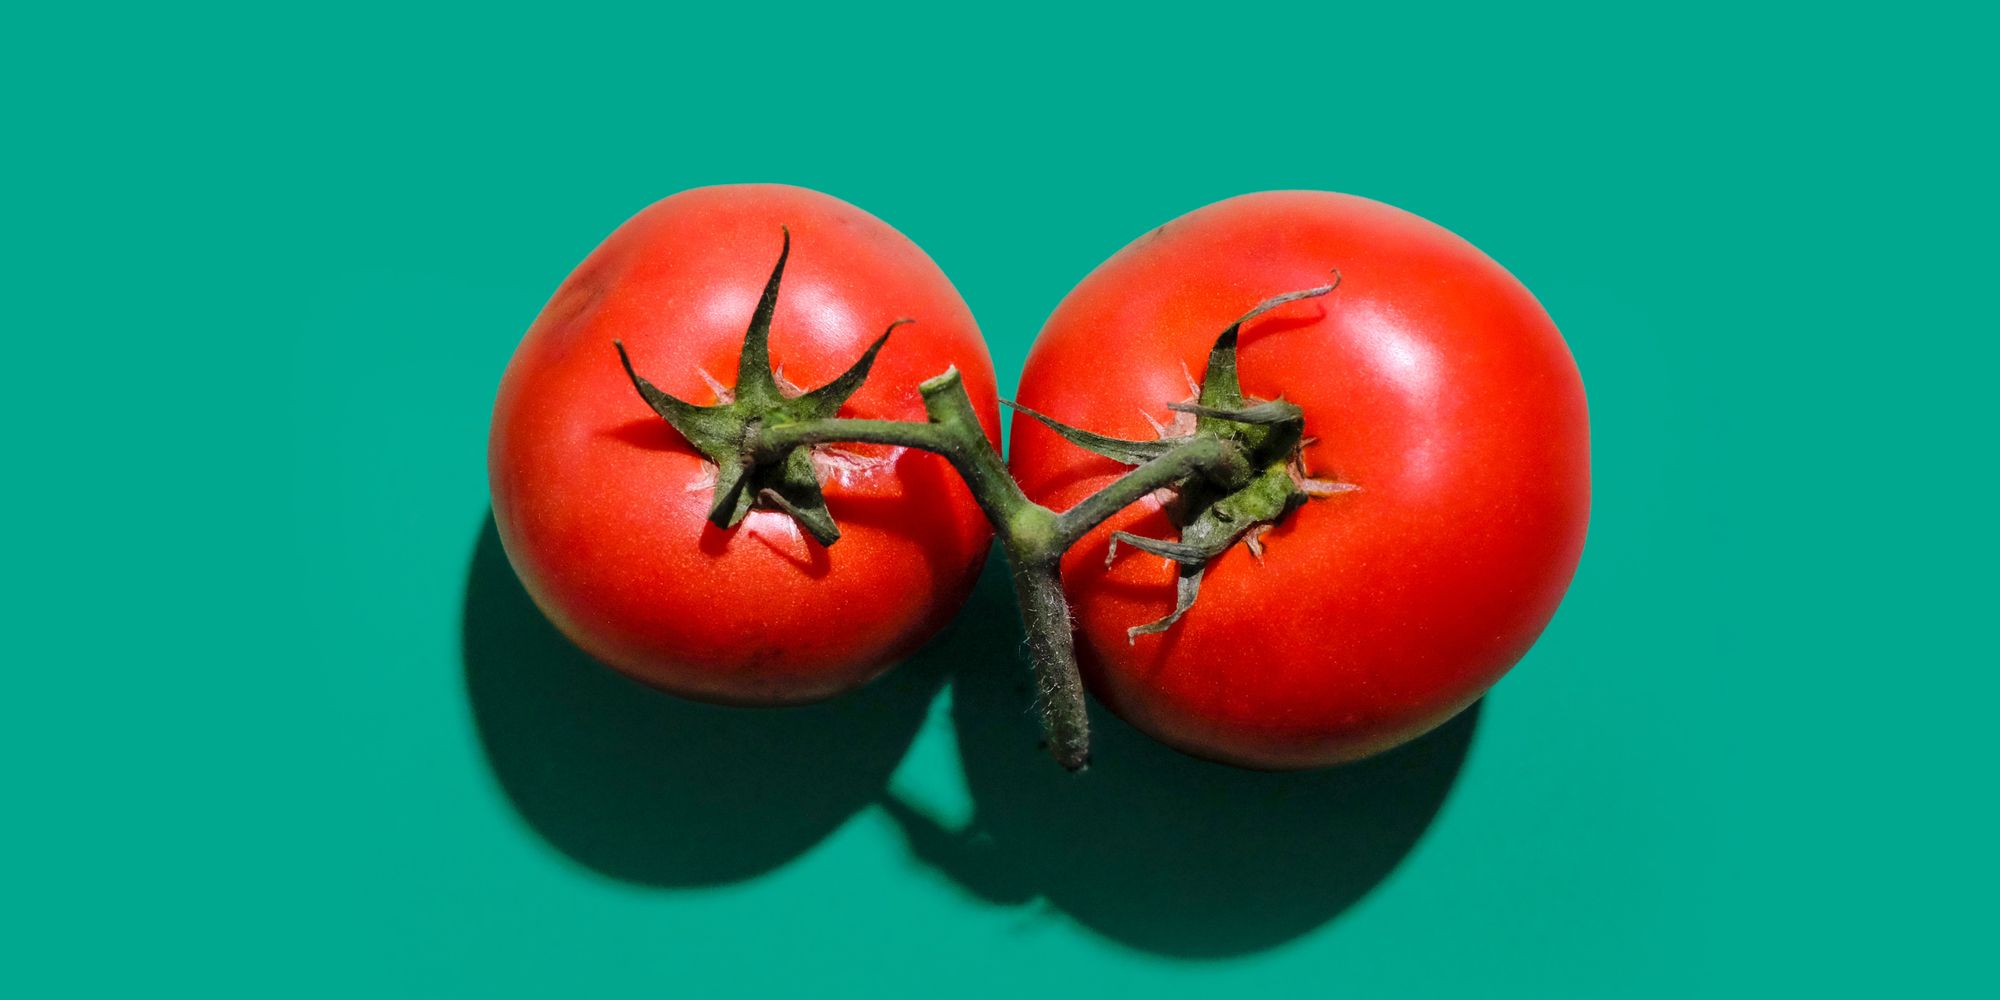 Cover Image for What planting tomatoes shows us about climate change